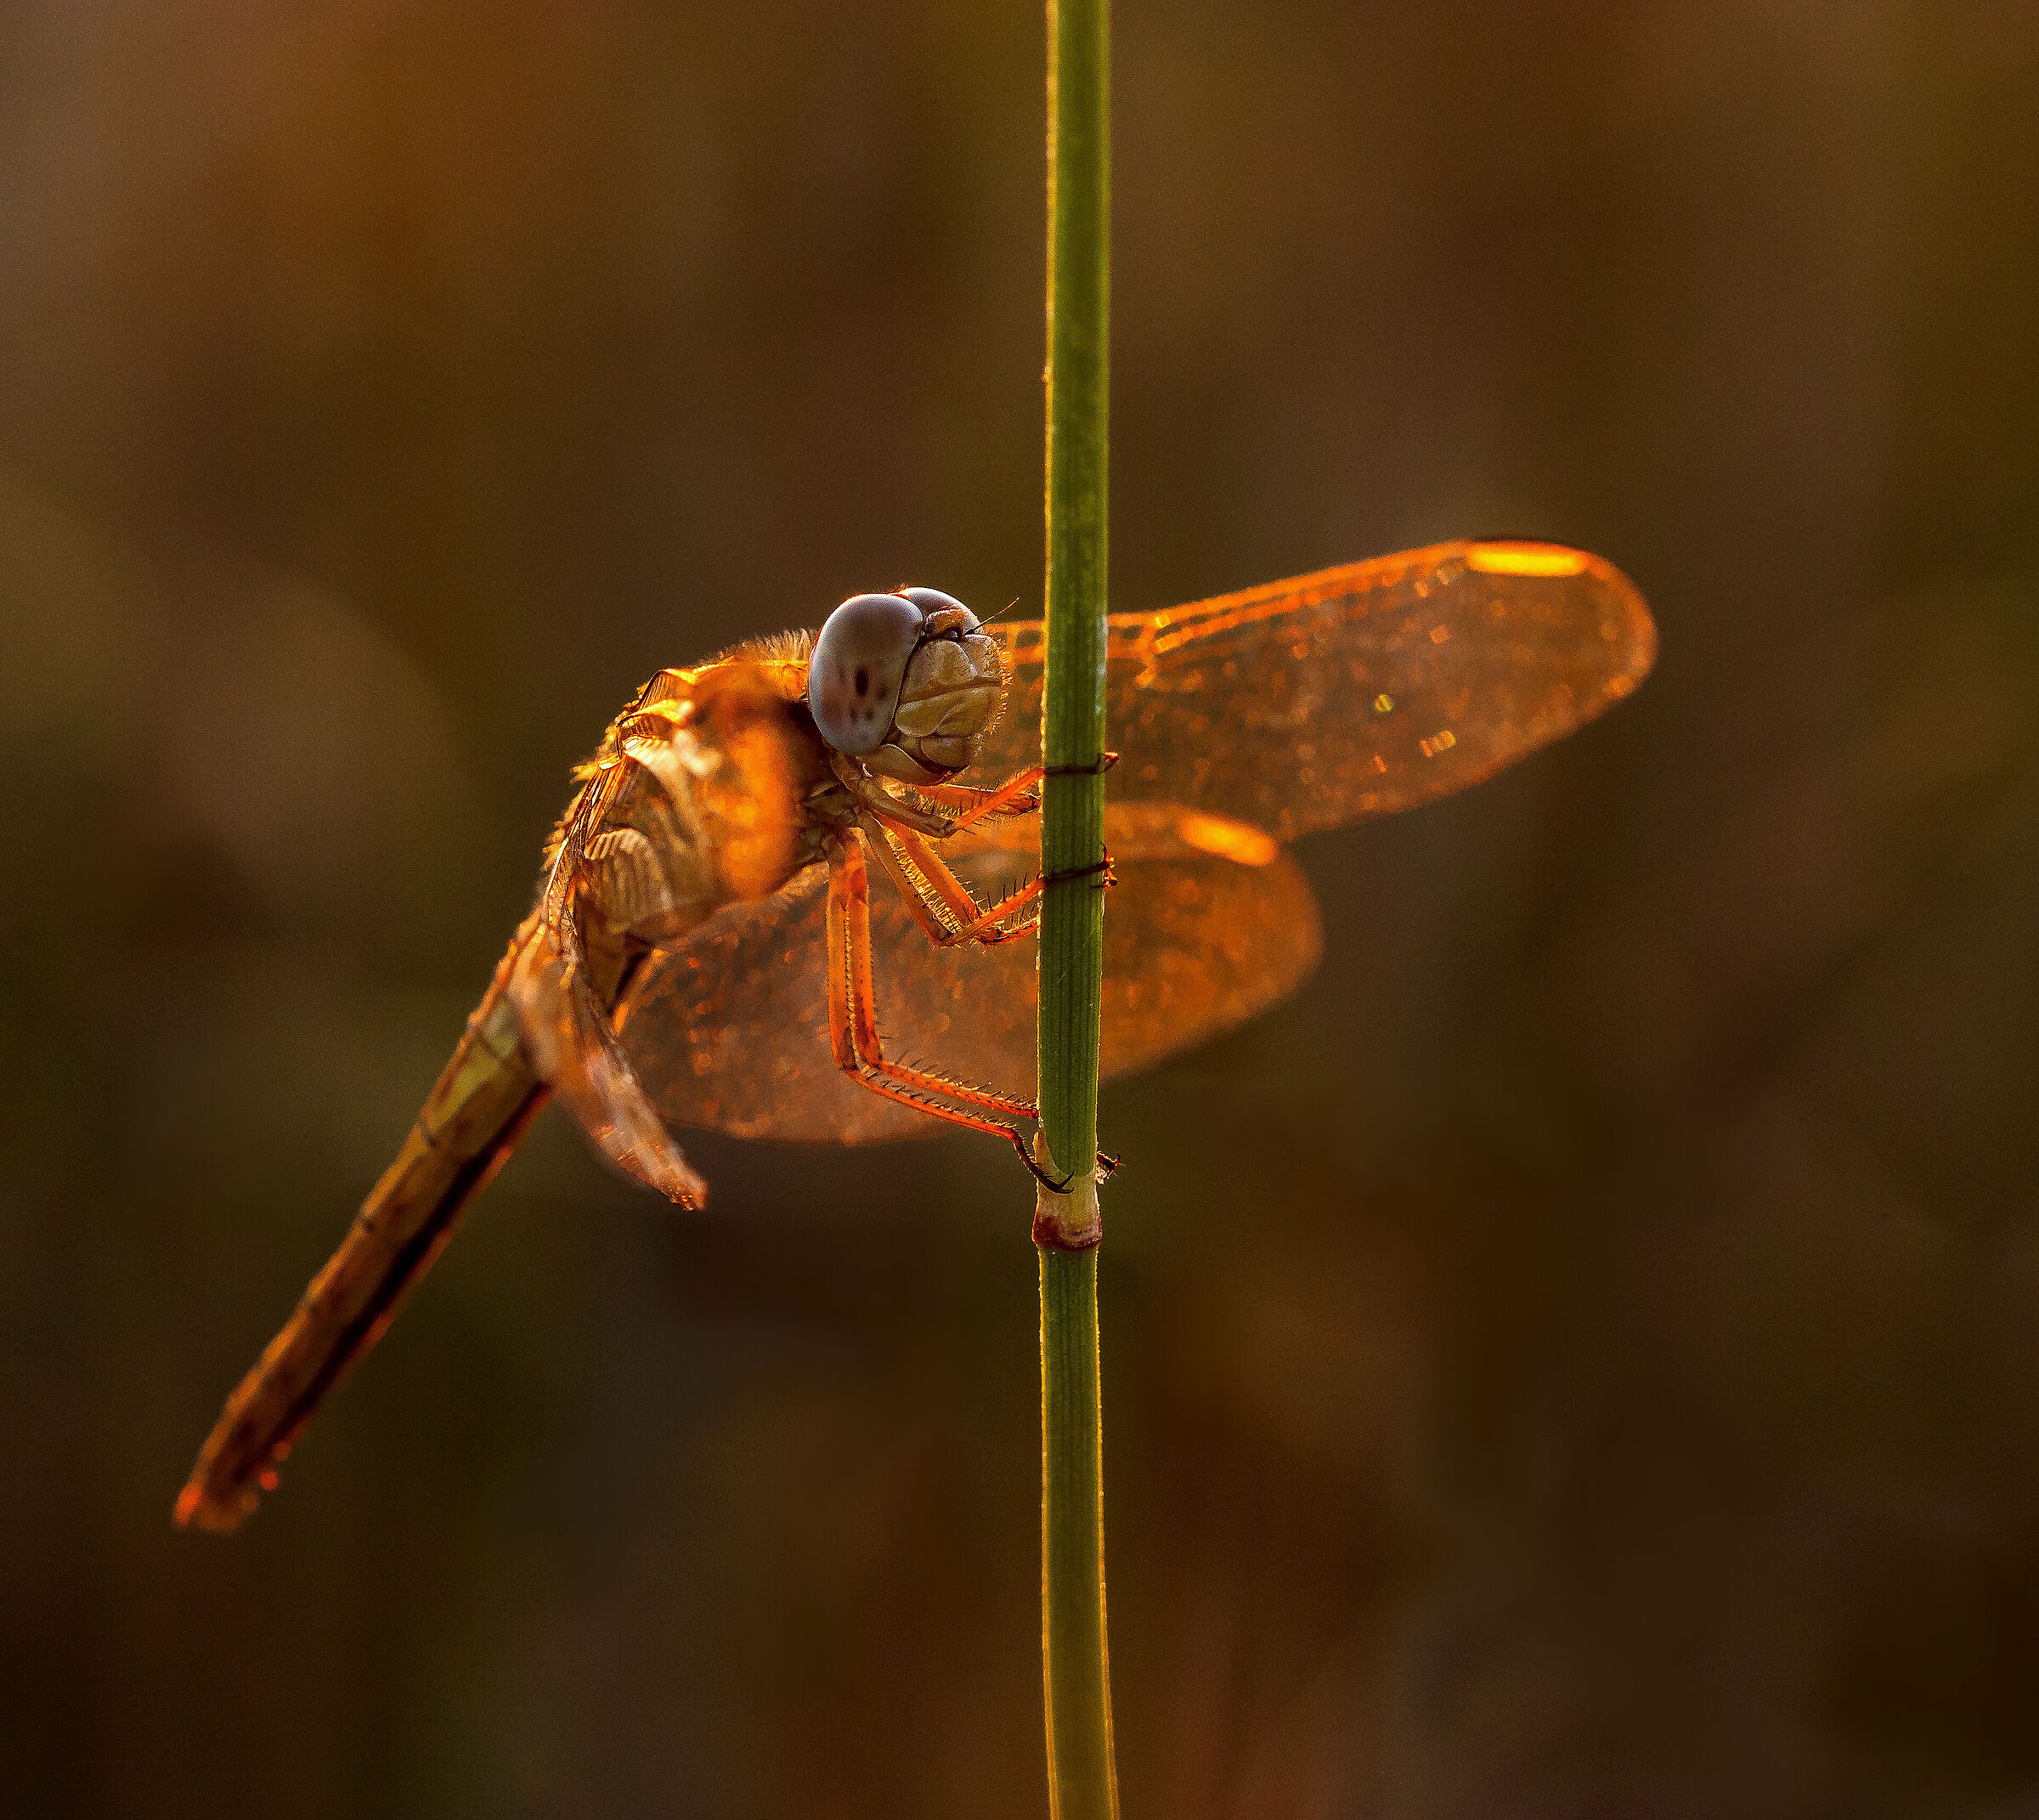 Dragonfly bathed in the golden lights of dawn...